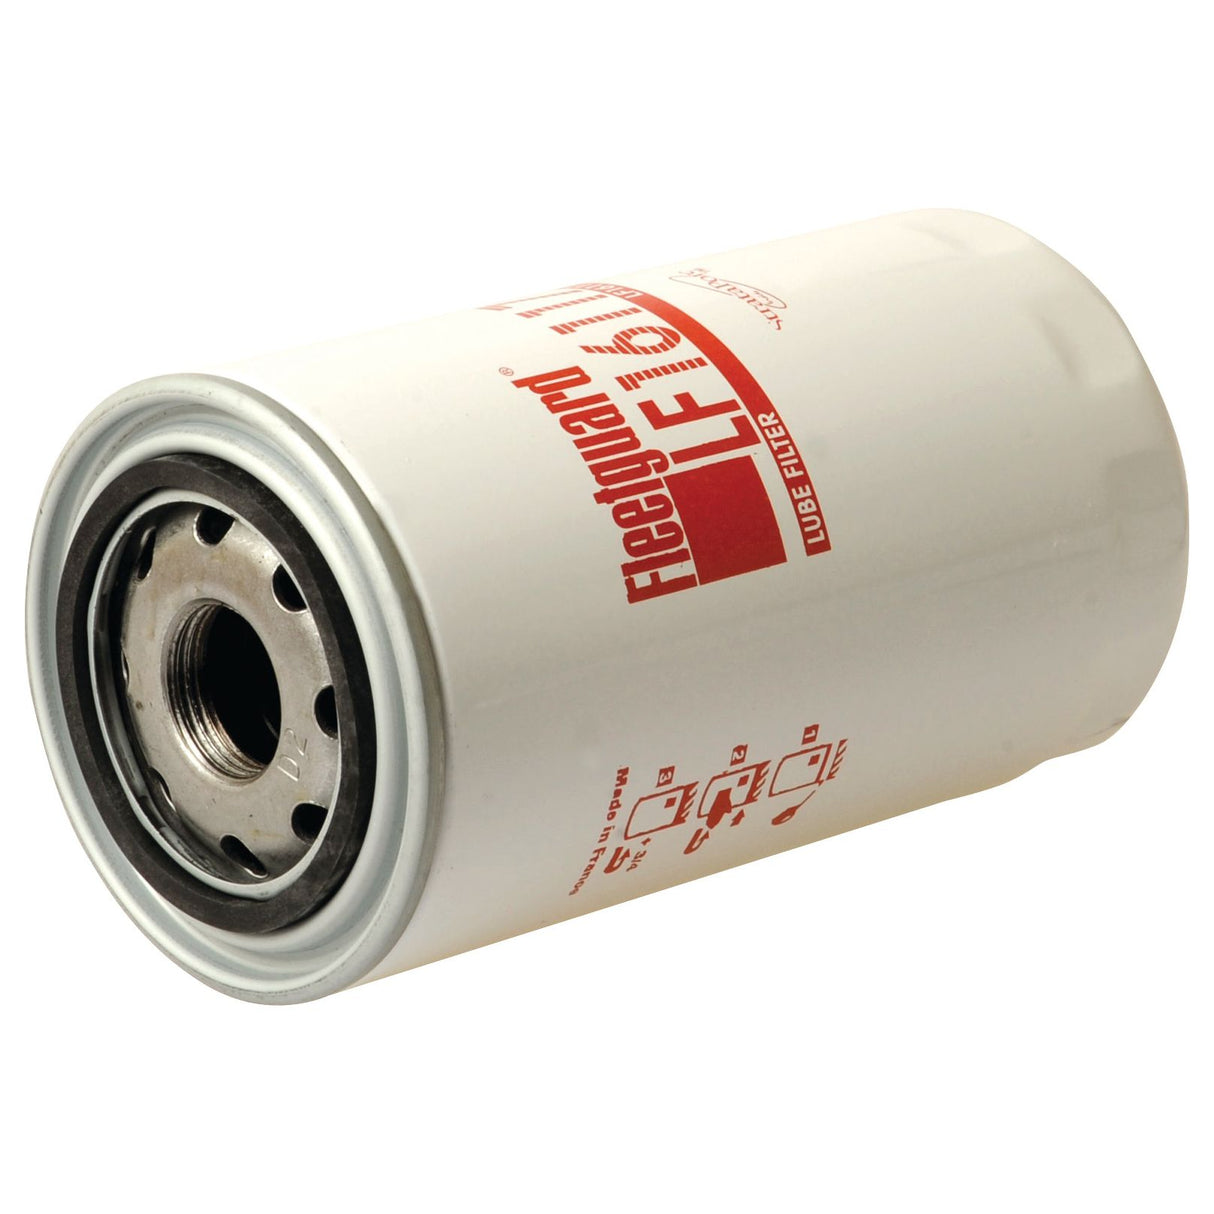 Oil Filter - Spin On - LF16117
 - S.73138 - Farming Parts